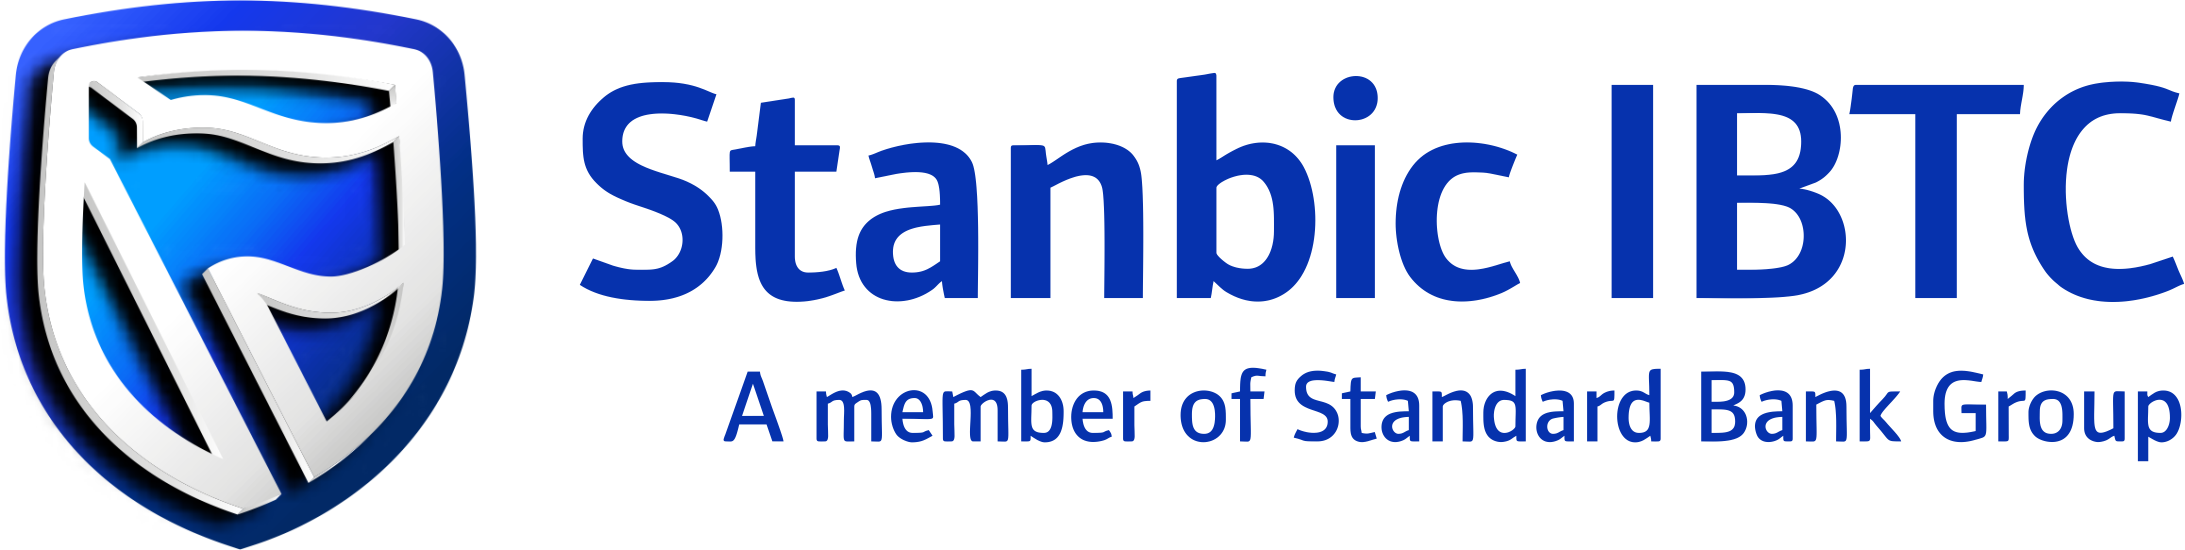 STANBIC IBTC Infrastructure Fund Series II Offer Is Now Open